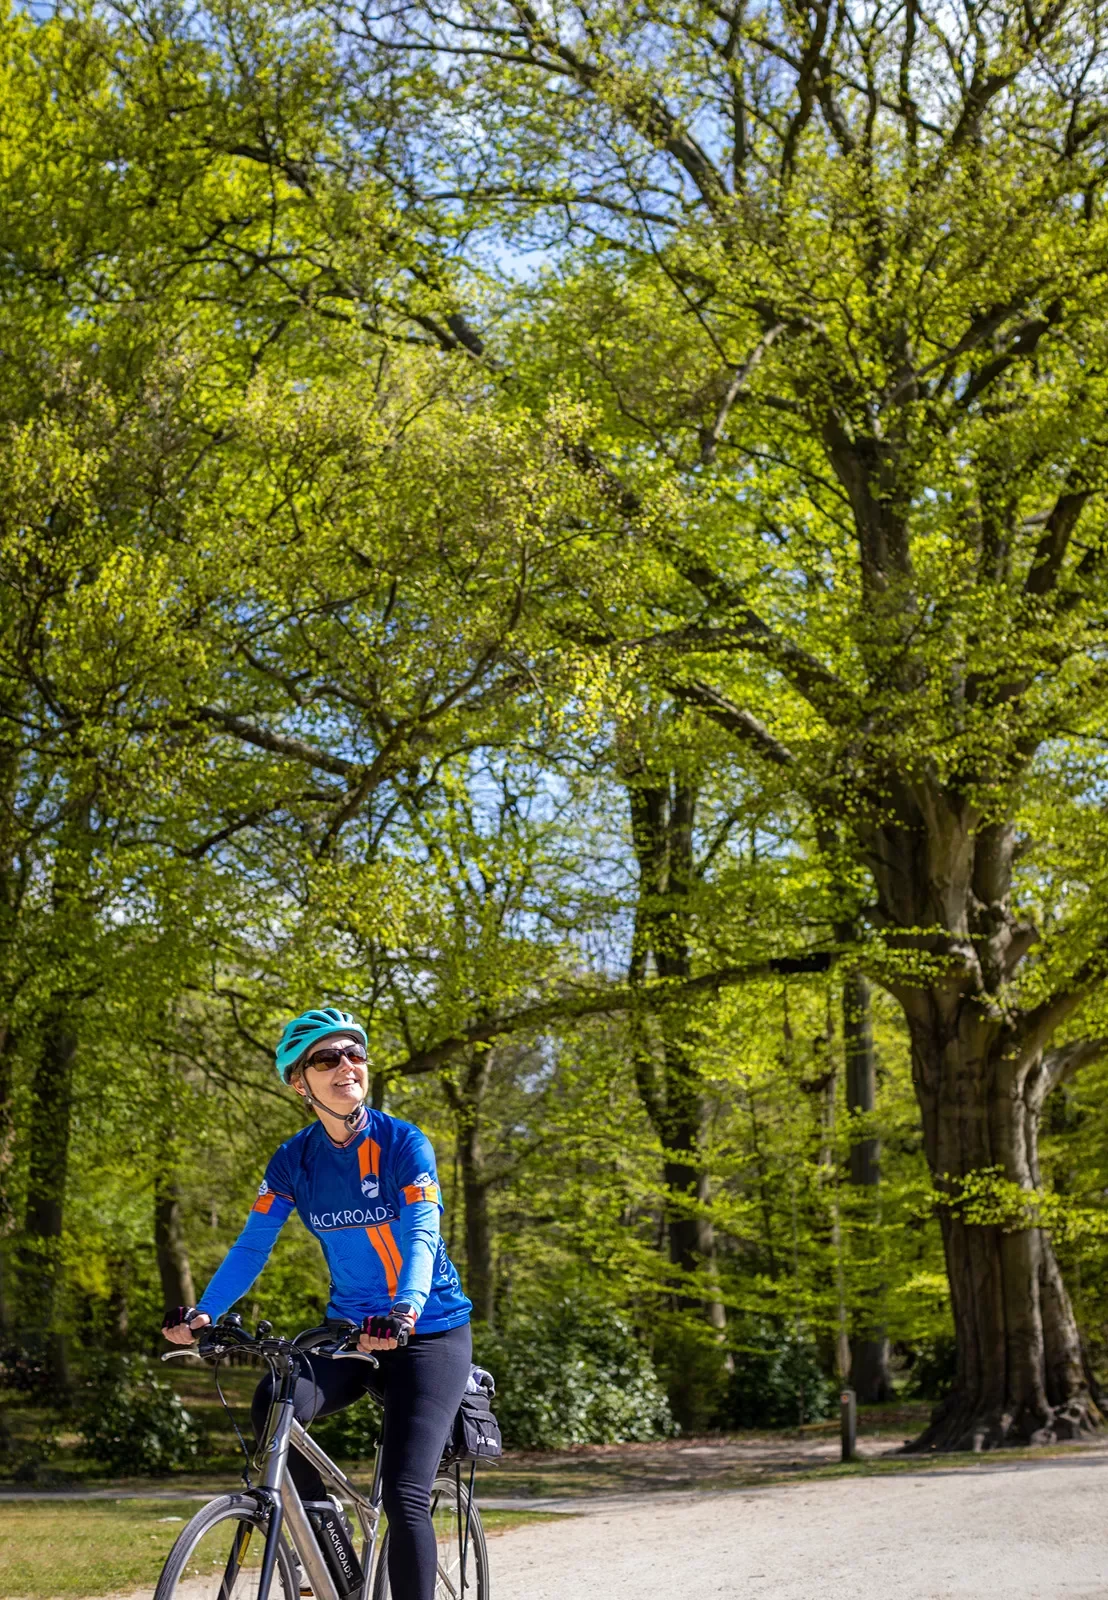 A person riding on an e-bike looking up at trees